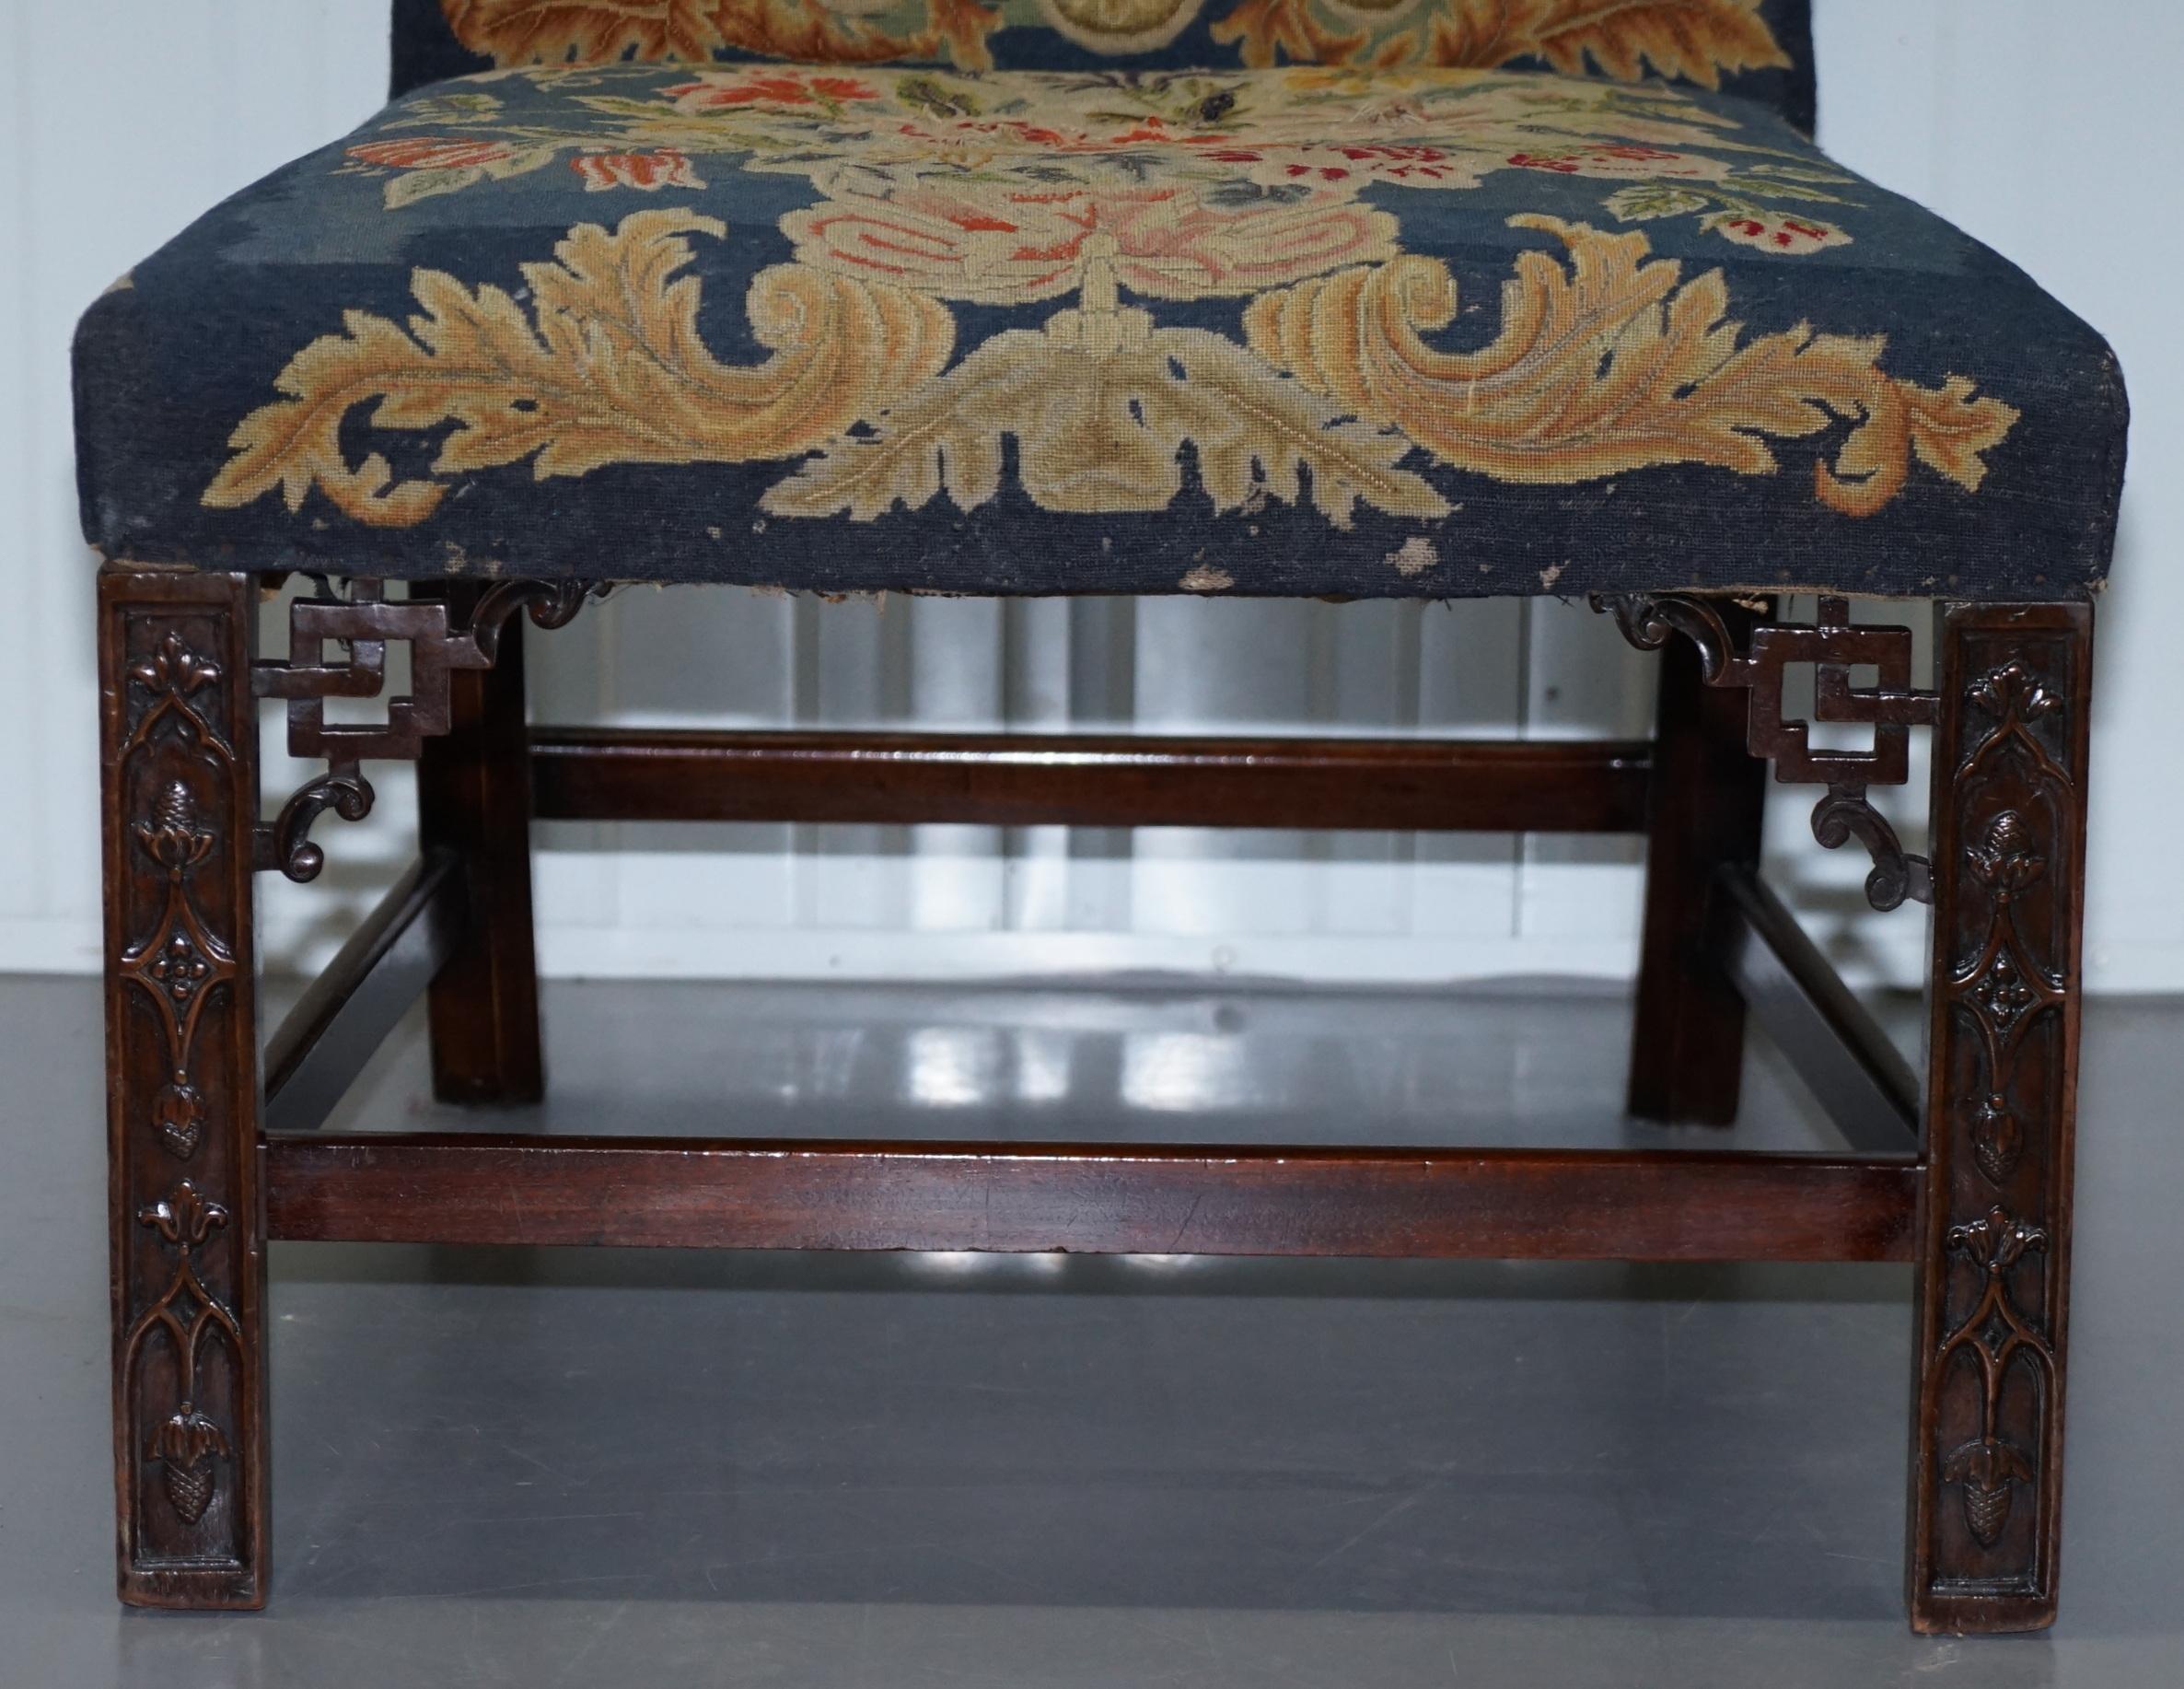 Georgian Rare Pair of Thomas Chippendale Period 1760 Embroidered Chairs Ornately Carved For Sale